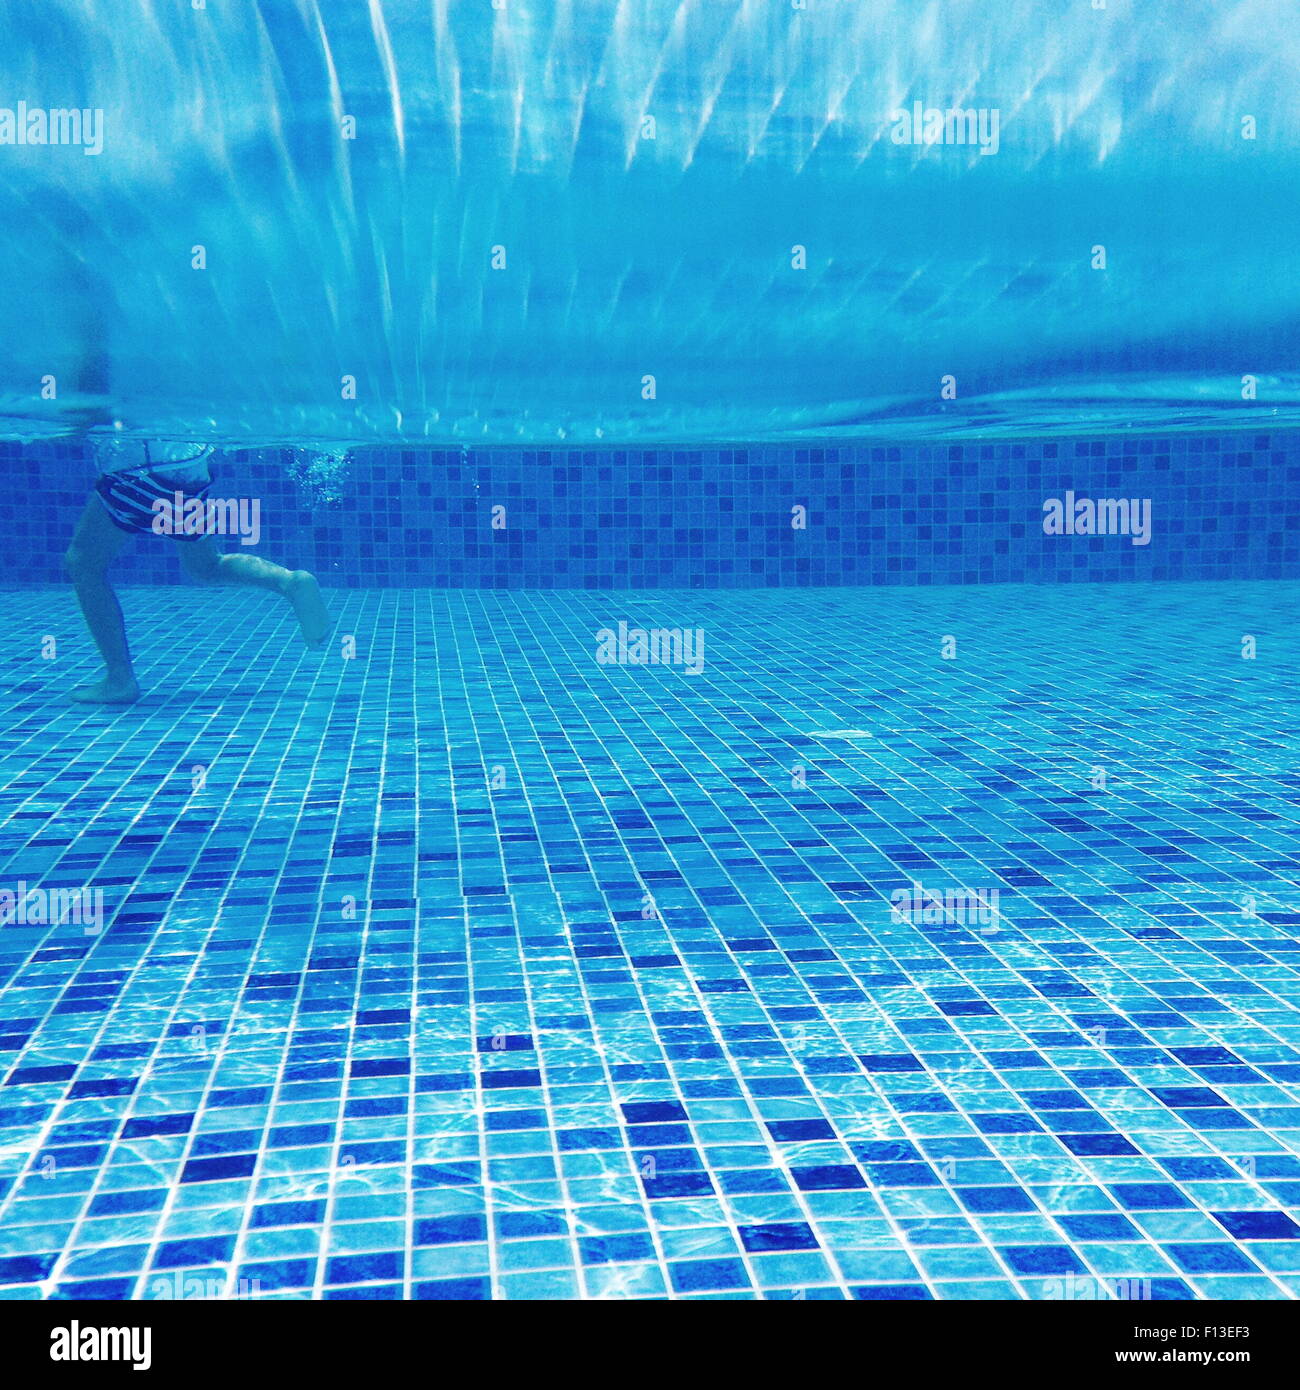 Underwater view of a boy walking in a swimming pool Stock Photo